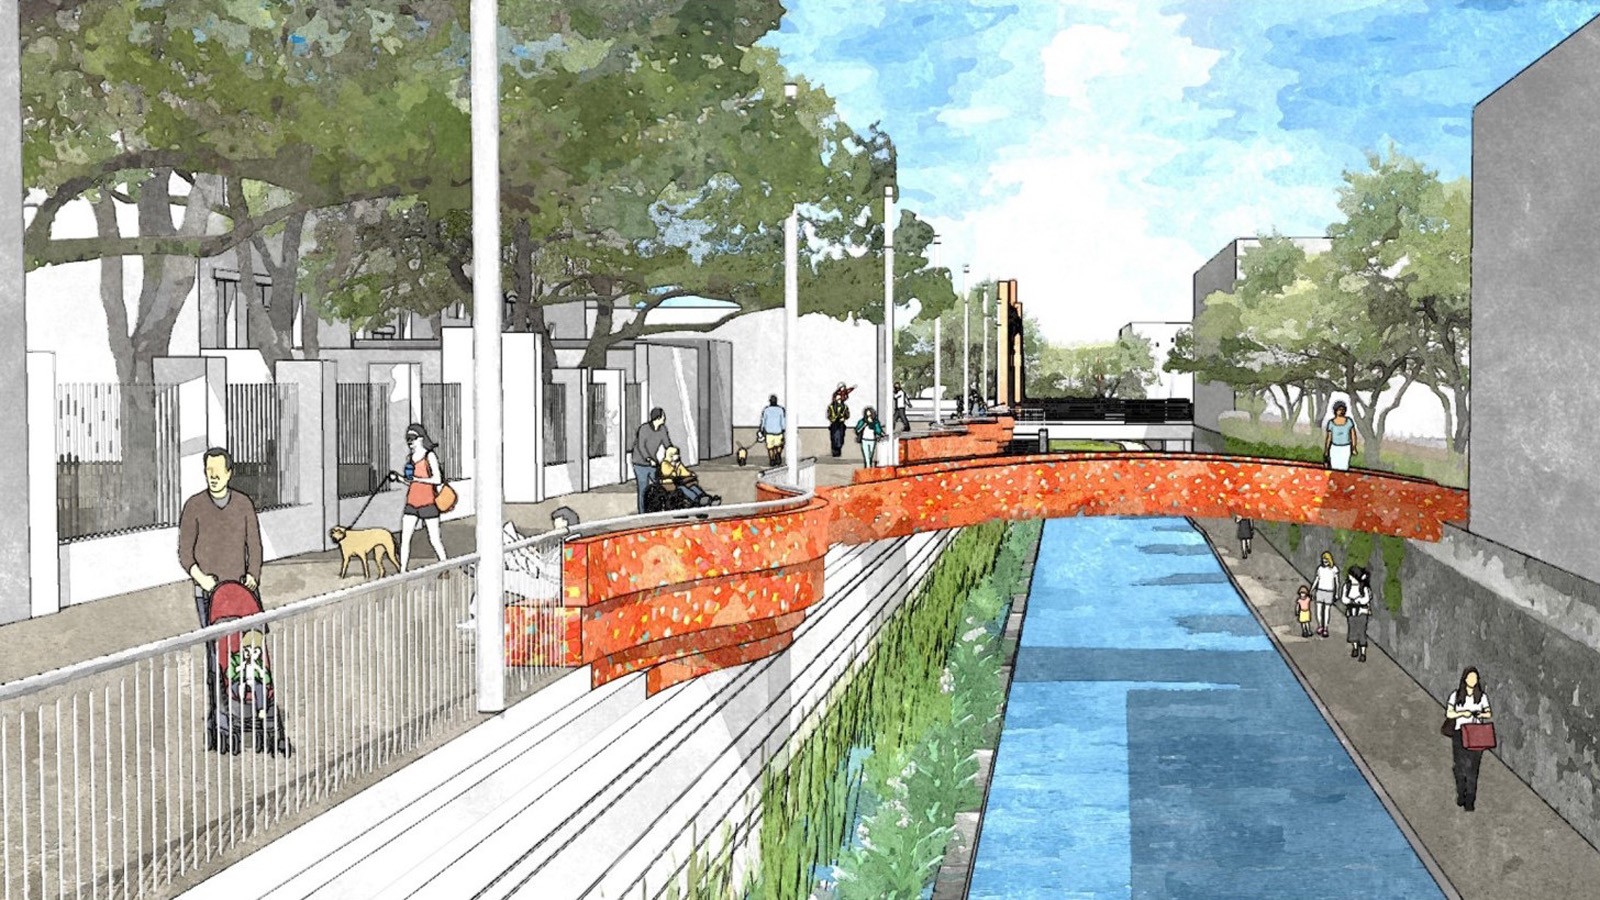 San Pedro Creek adjacent to the Spanish Governor’s Palace (proposed) - Rendering courtesy the San Antonio River Authority